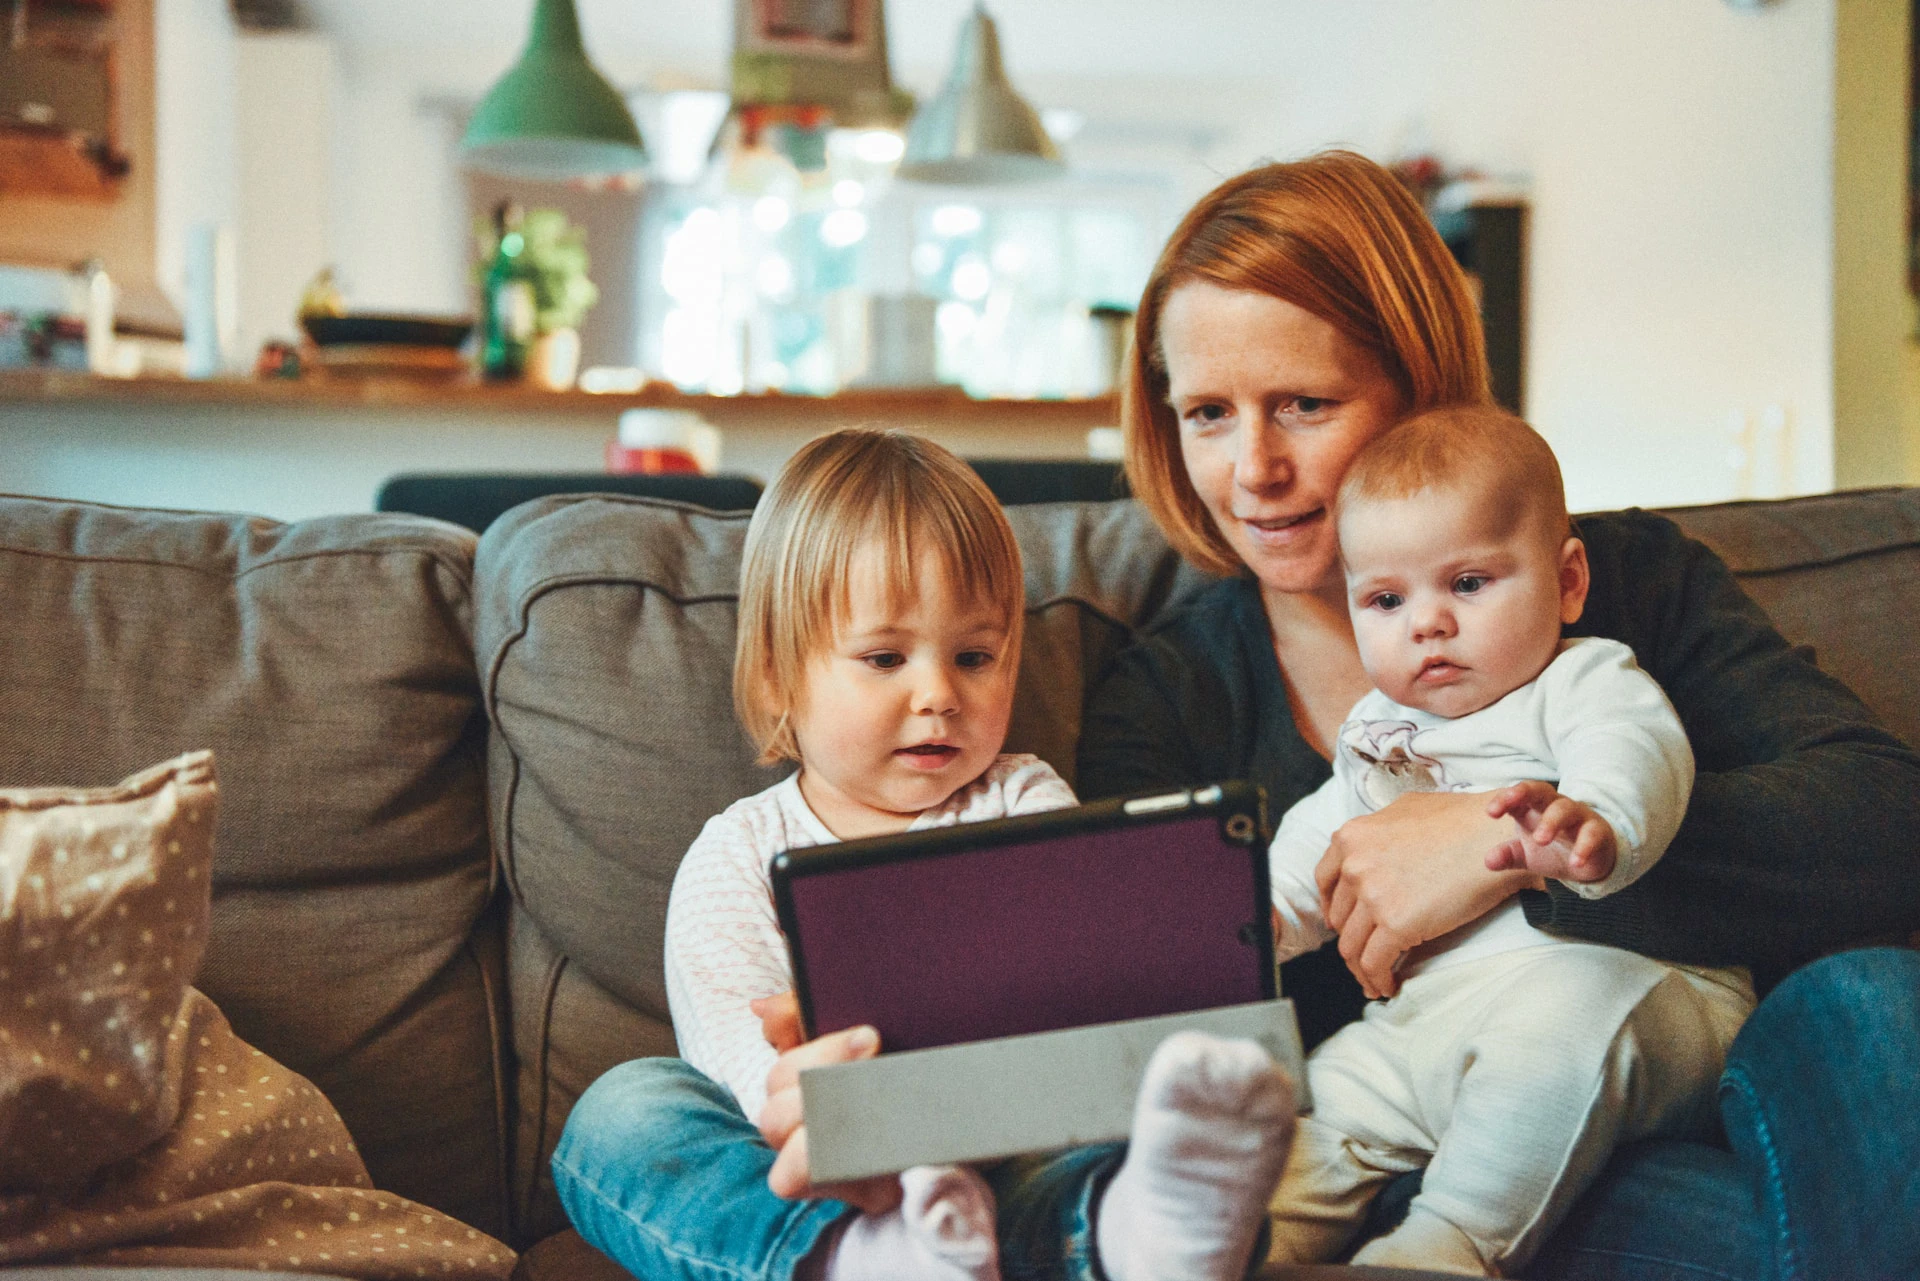 mother showing something to toddler and baby on tablet